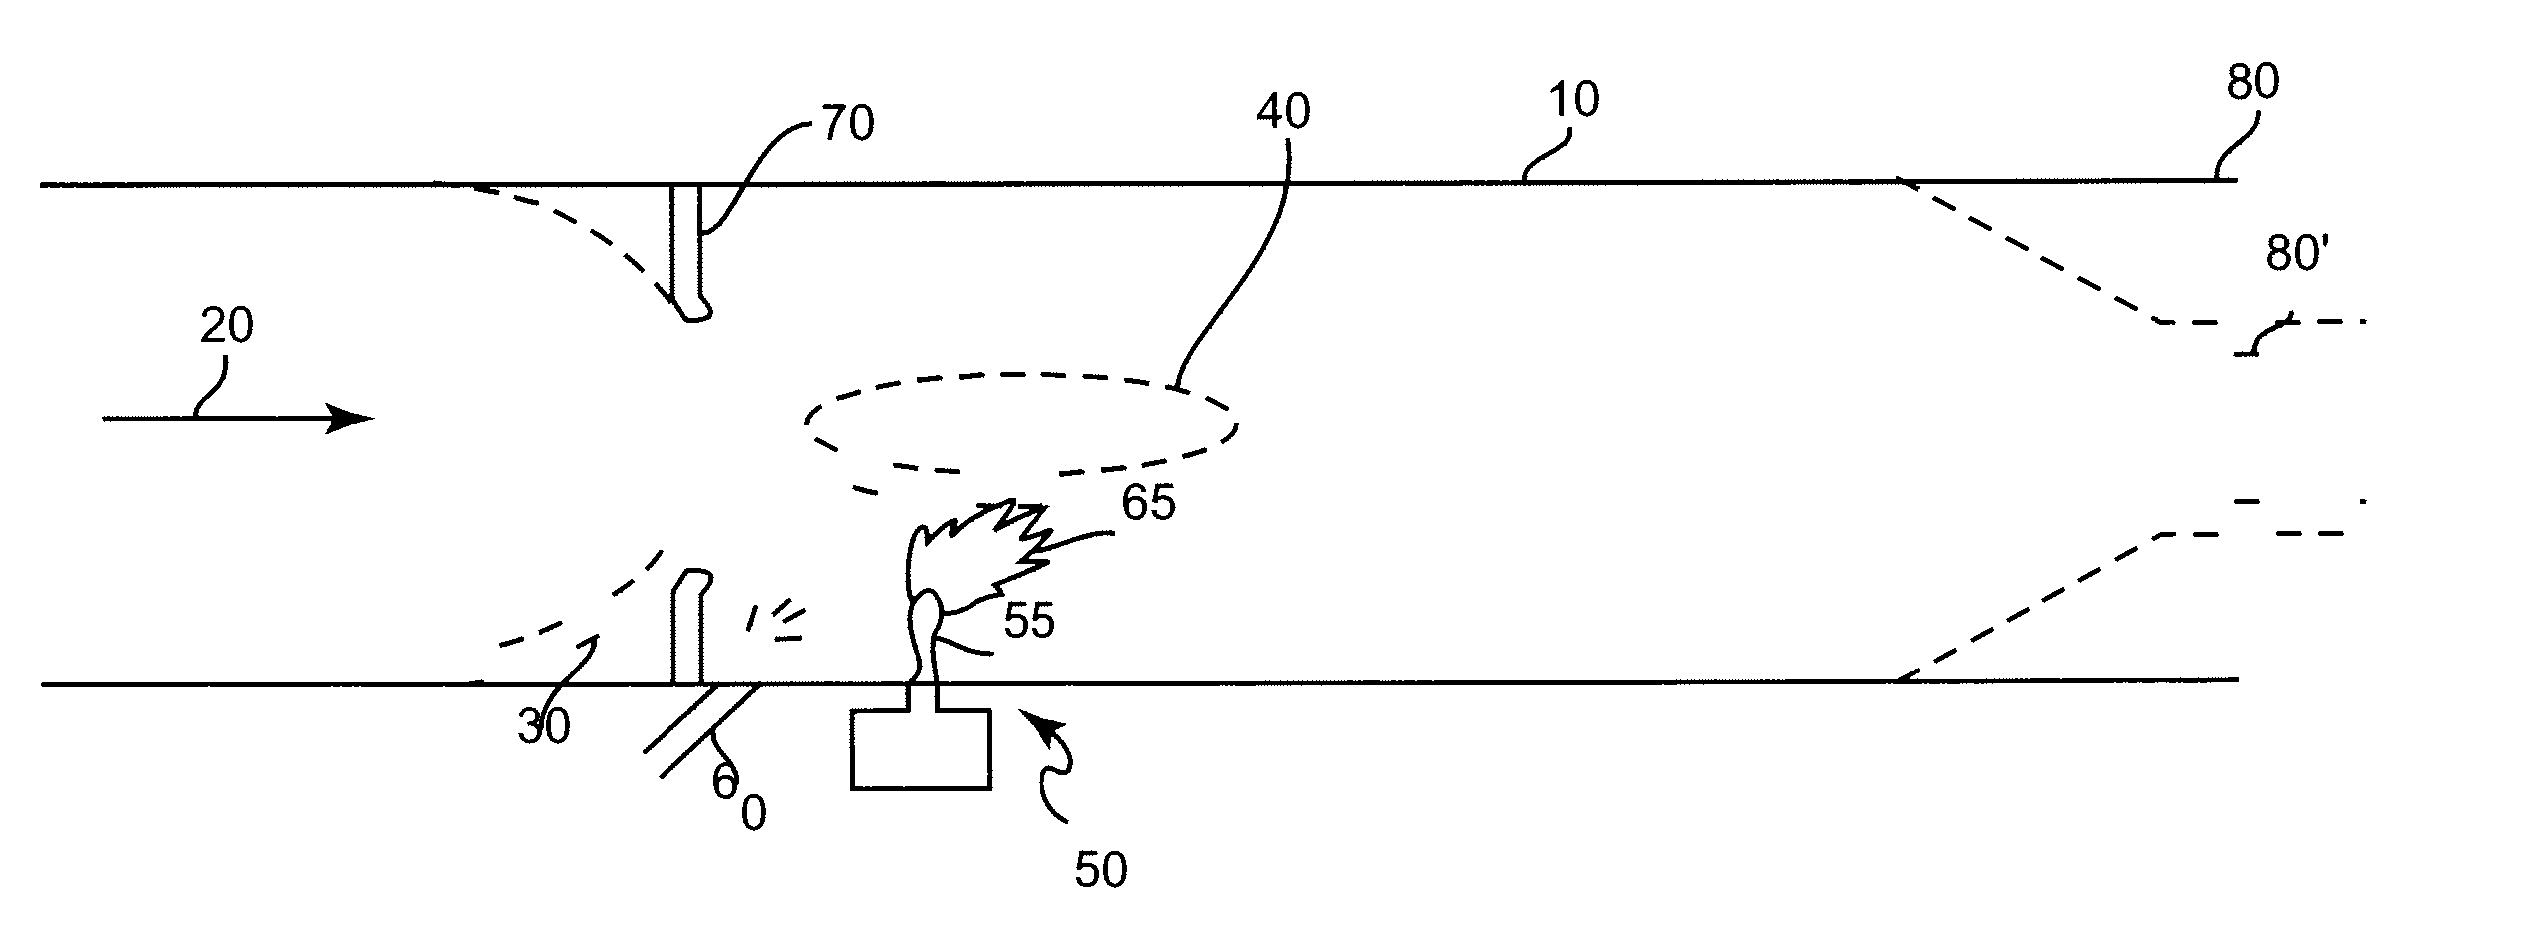 Improved Plasma Torch for Ignition, Flameholding and Enhancement of Combustion in High Speed Flows